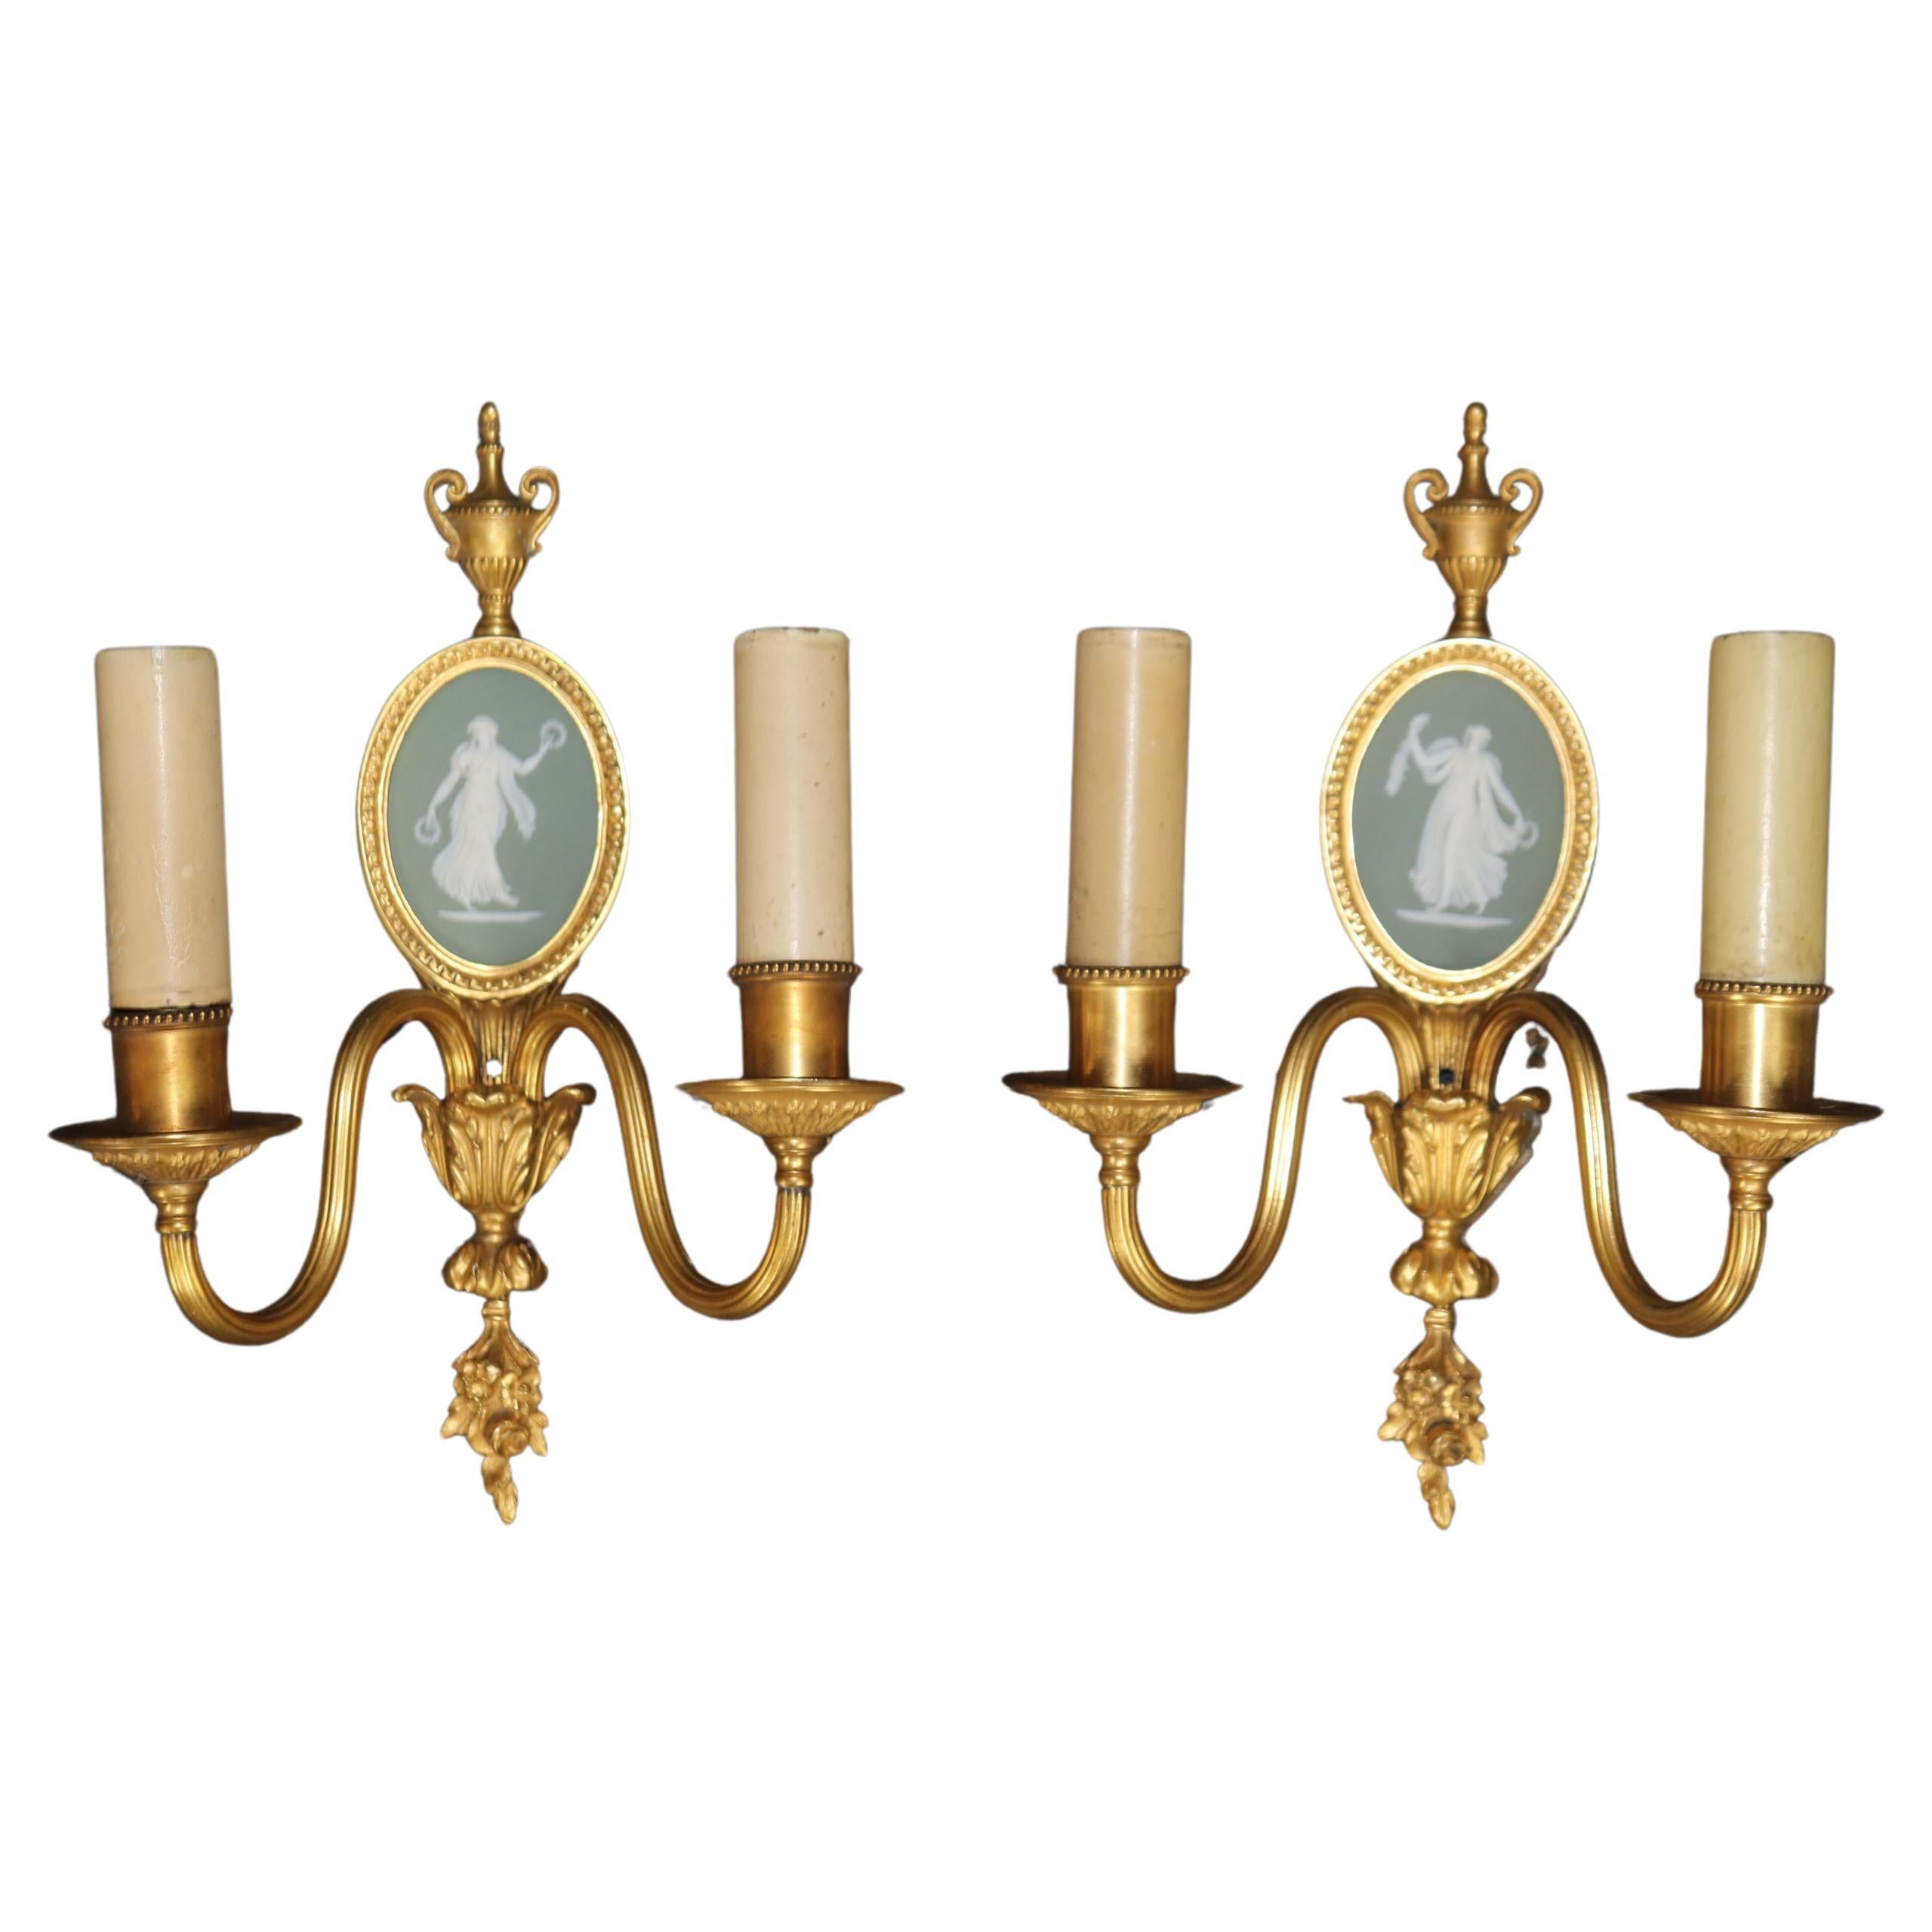 Pair of 19th Century French Bronze Ormolu Sconces With English Wedgwood Plaques